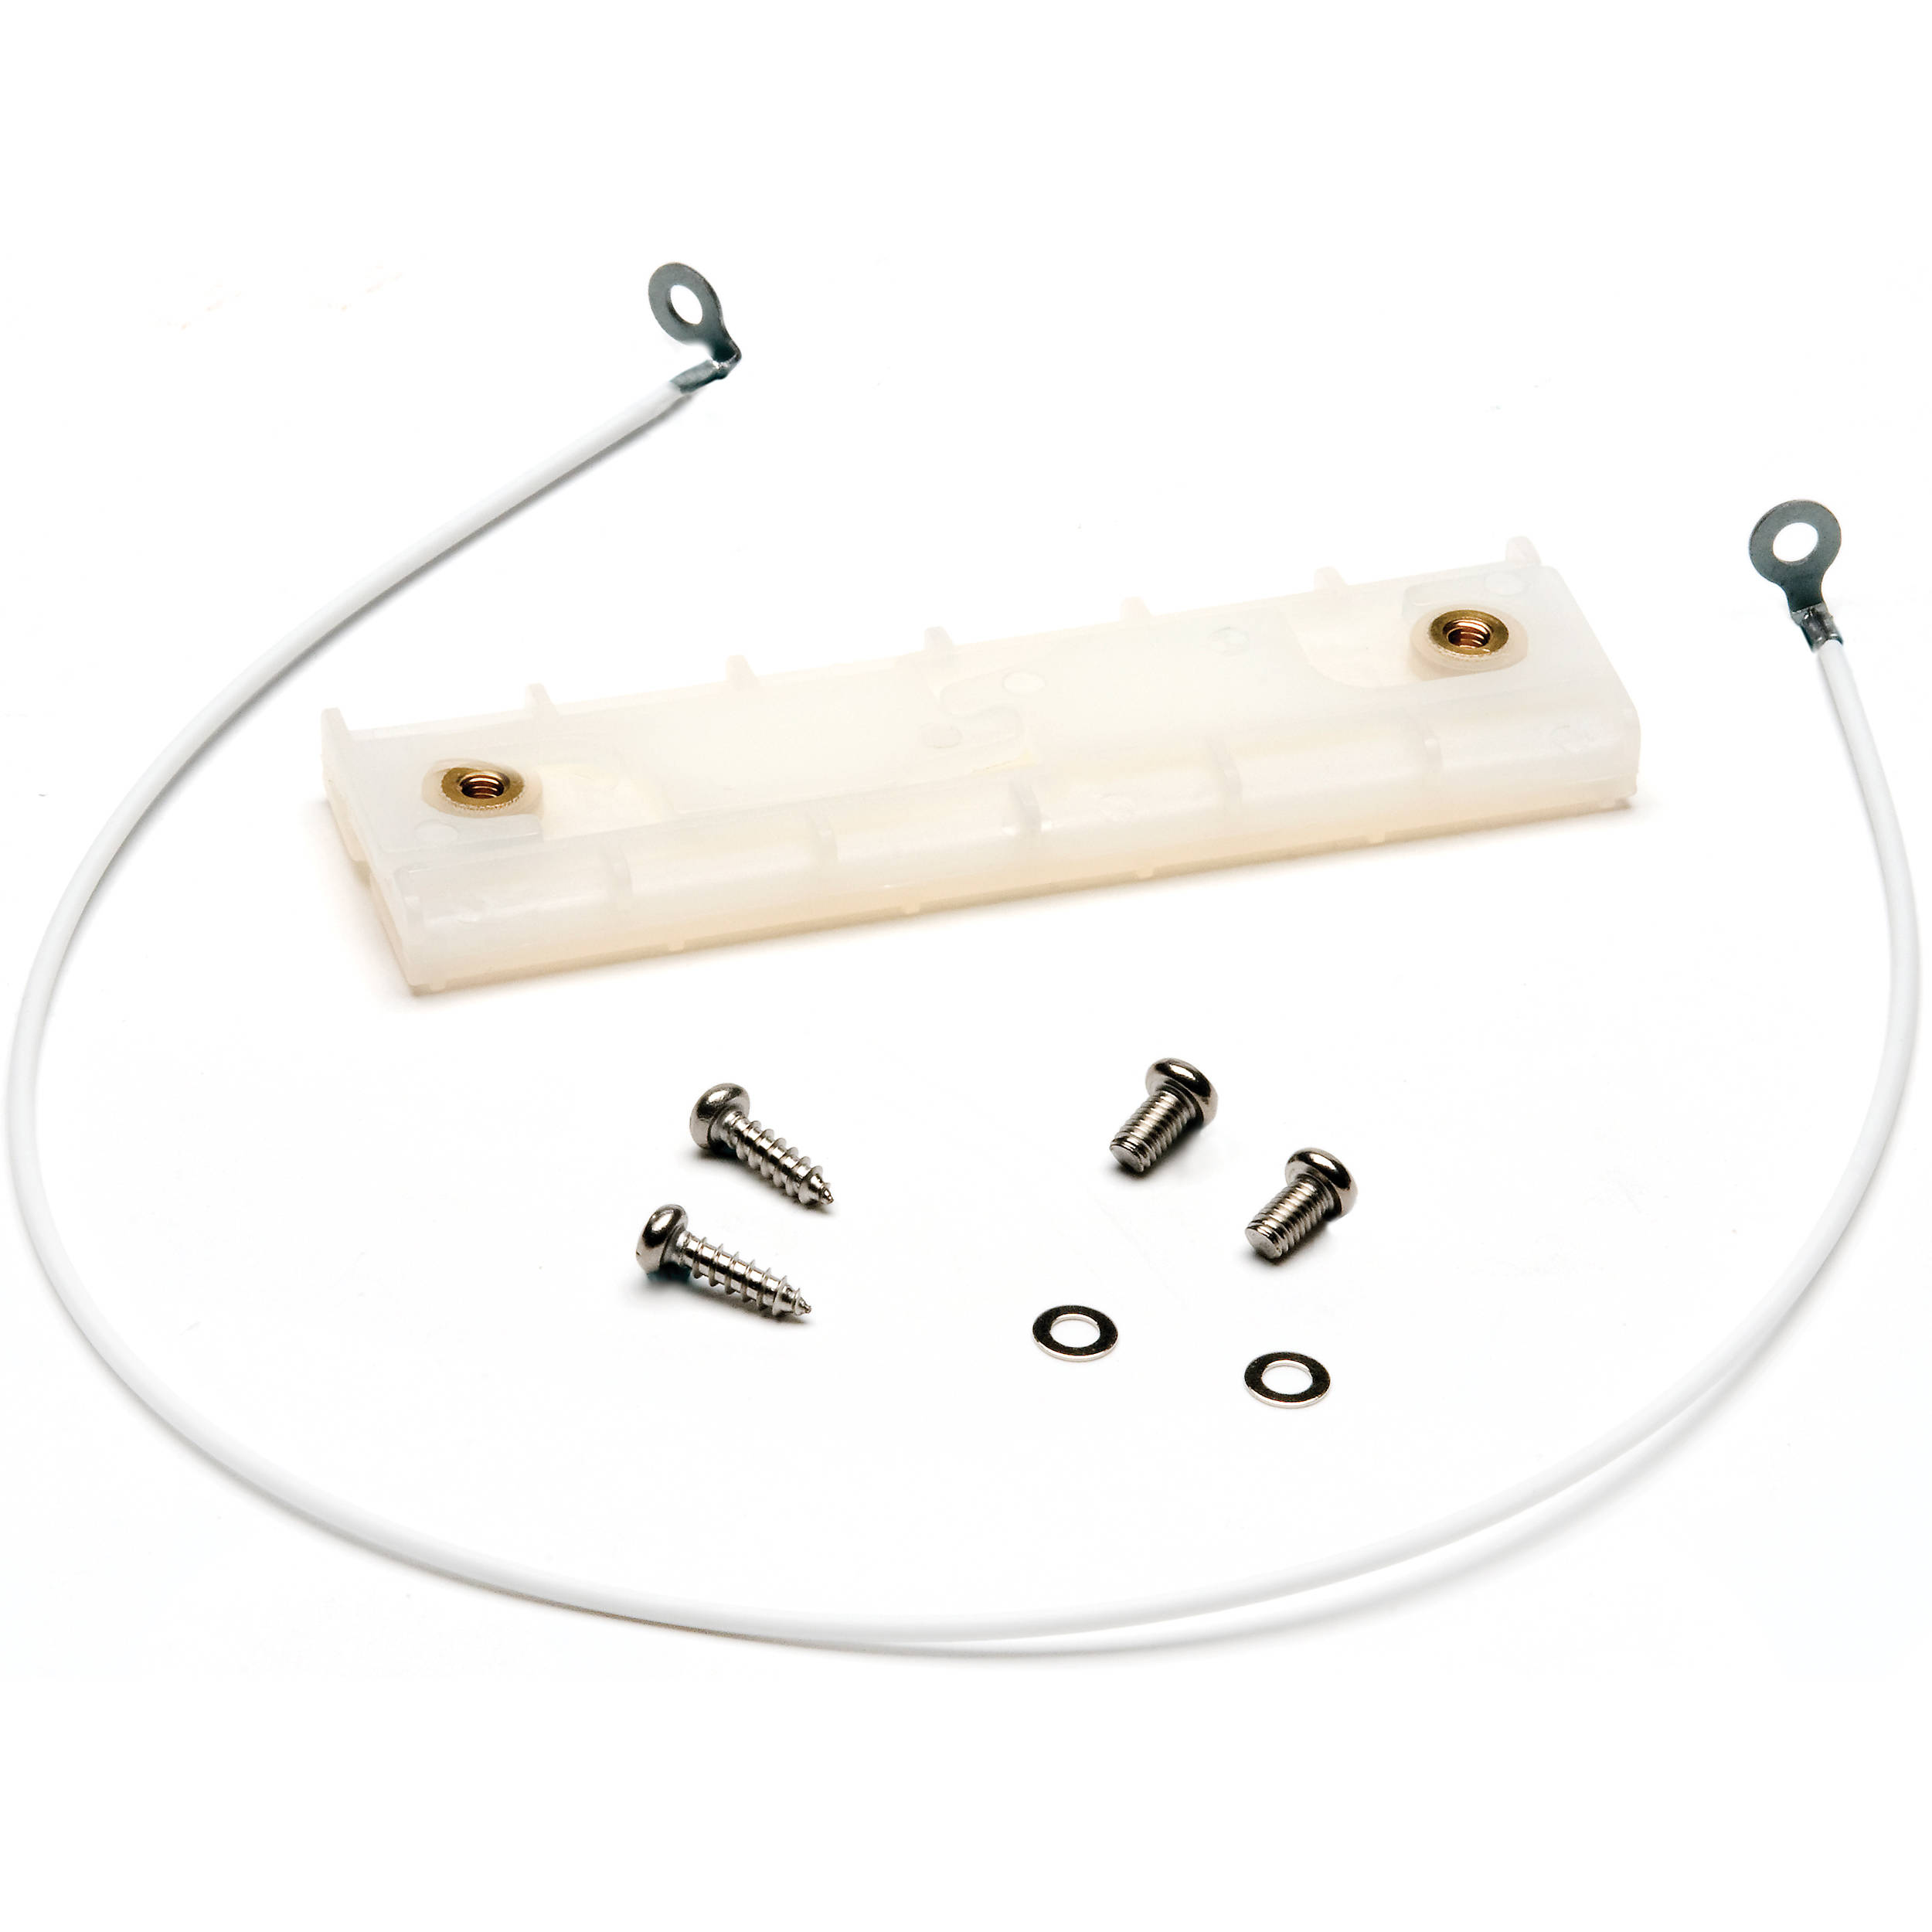 Revolabs Remote Antenna dropped ceiling mount kit